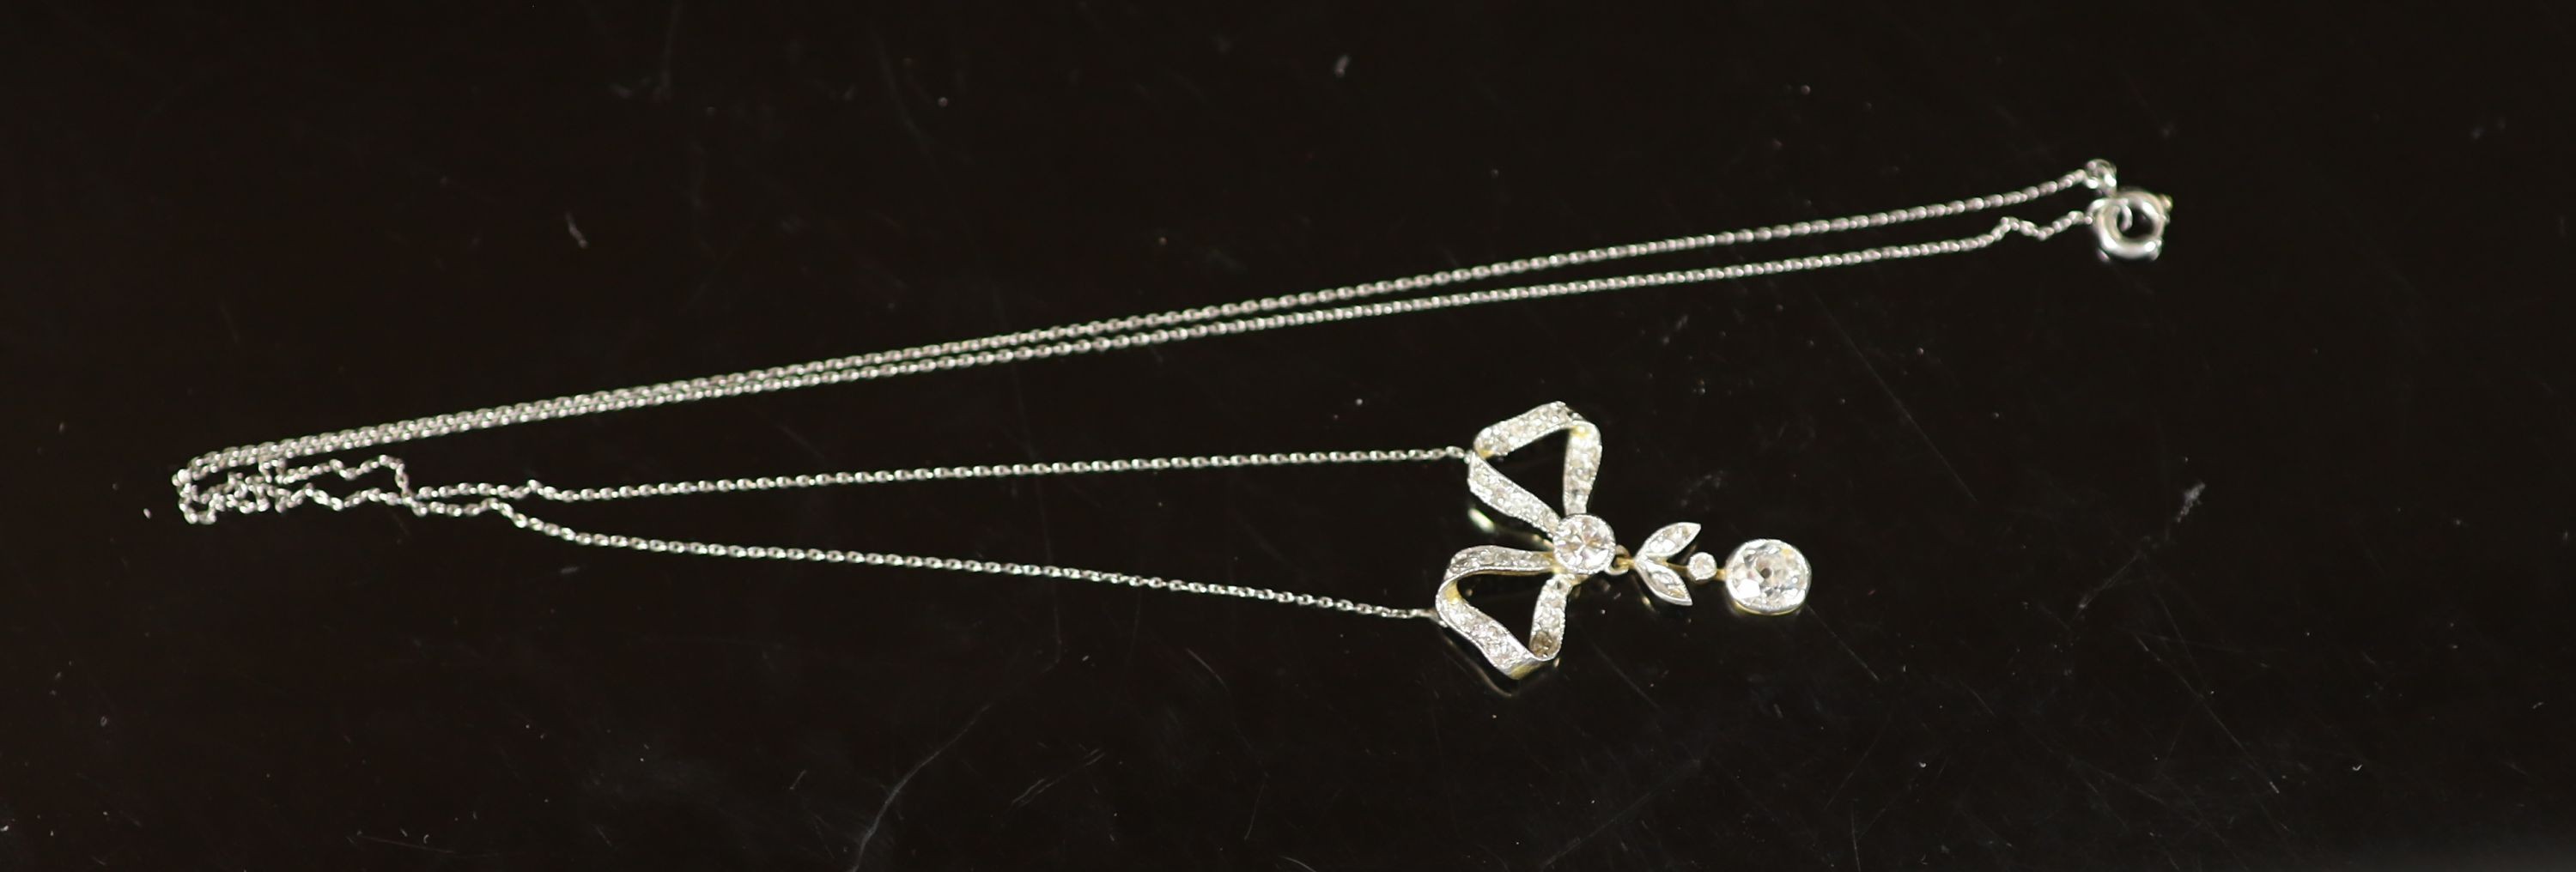 An early 20th century gold, platinum and diamond set drop ribbon bow pendant necklace